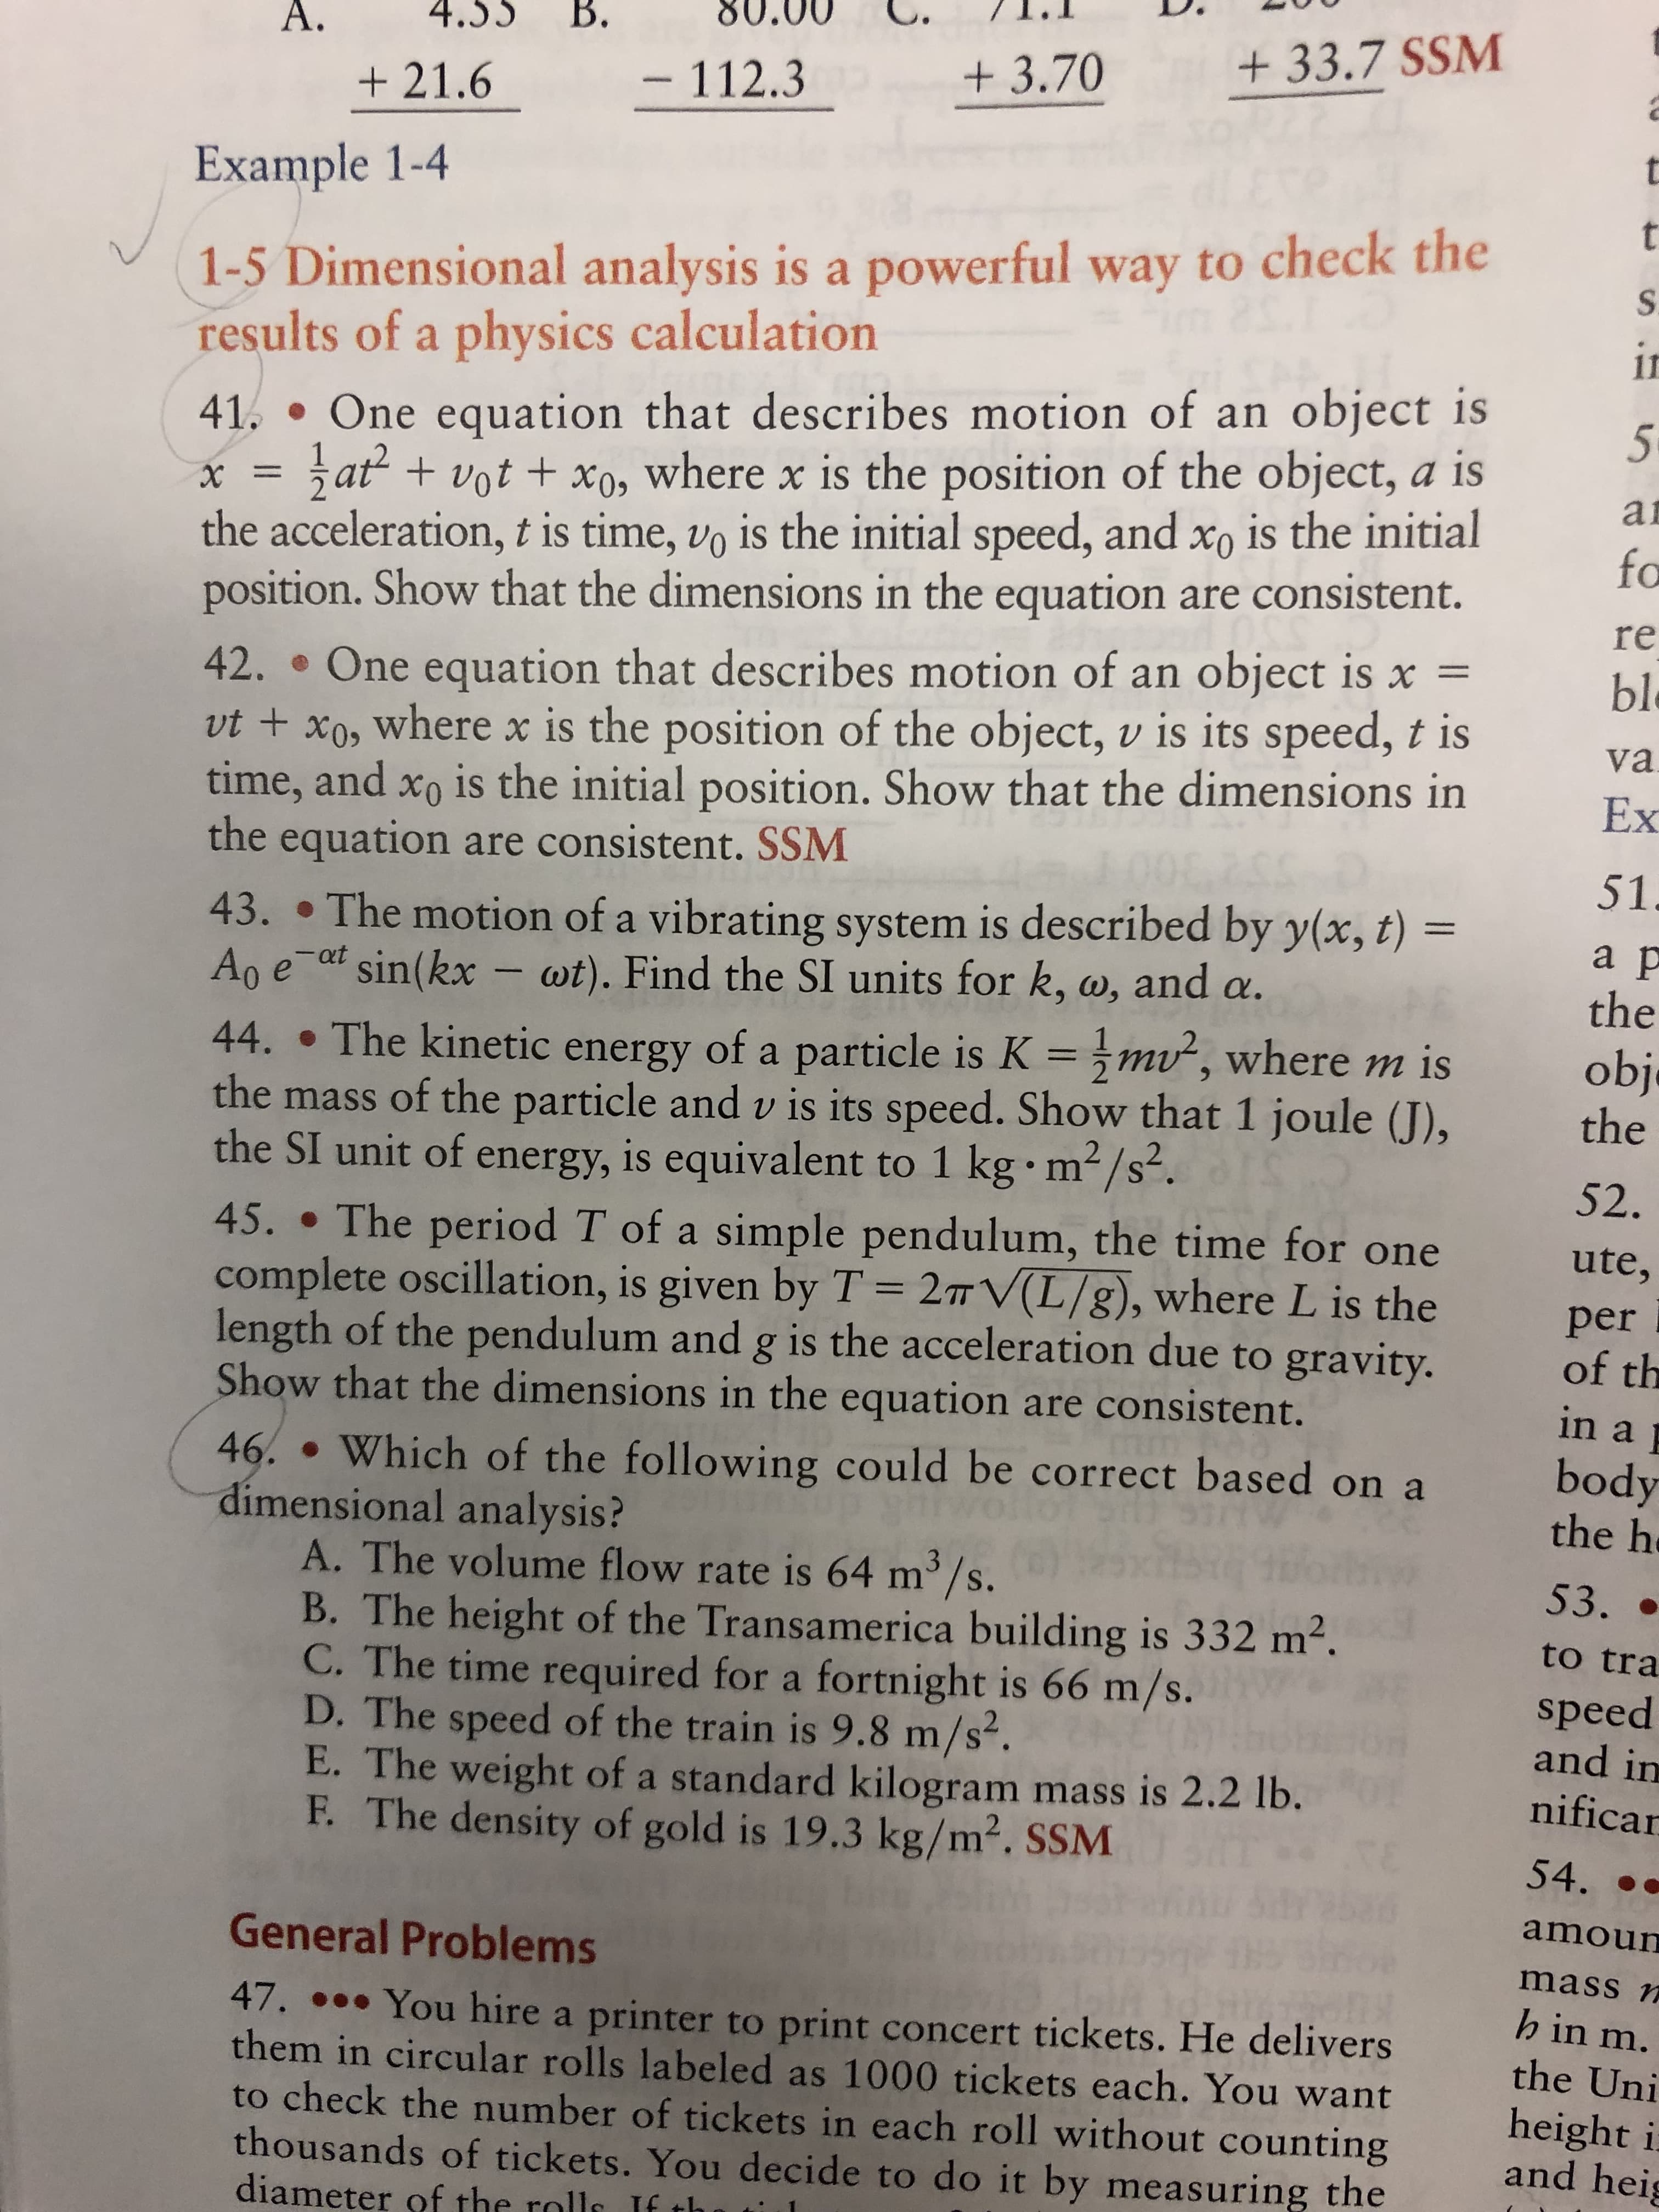 4.53 B.
80.00 C. I.I
+21.6 112.3 3.70 33.7 SSM
Example 1-4
1-5 Dimensional analysis is a powerful way to check the
results of a physics calculation
41. One equation that describes motion of an object is
5
xat+vot +xo, where x is the position of the object, a is
ai
the acceleration, t is time, vo is the initial speed, and xo is the initial
position. Show that the dimensions in the equation are consistent.
42. . One equation that describes motion of an object is x
ut t xo, where x is the position of the object, v is its speed, t is
time, and xo is the initial position. Show that the dimensions inx
bl
the equation are consistent. SSM
43. . The motion of a vibrating system is described by y(x, t)
A e-at sin(kx-wt). Find the SI units for k, a, and α.
44. . The kinetic energy of a particle is K m2, where m is
the mass of the particle and v is its speed. Show that 1 joule (J),
the SI unit of energy, is equivalent to 1 kg m2/s2.
45. .The period T of a simple pendulum, the time for one
complete oscillation, is given by T 2TV(L/8), where L is the per
length of the pendulum and g is the acceleration due to gravity
Show that the dimensions in the equation are consistent
obj
in a
46 . Which of the following could be correct based on a body
dimensional analysis?
A. The volume flow rate is 64 m3/s
B. The height of the Transamerica building is 332 m2.
C. The time required for a fortnight is 66 m/s.
D. The speed of the train is 9.8 m/s
E. The weight of a standard kilogram mass is 2.2 lb
F. The density of gold is 19.3 kg/m2. SSM
to tra
speed
and in
nifica
amoun
mass
h in m
General Problems
47. You hire a printer to print concert tickets. He delivers
them in circular rolls labeled as 1000 tickets each. You want
to check the number of tickets in each roll without counting
thousands of tickets. You decide to do it by measuring the
diameter of the rolls f th
an
